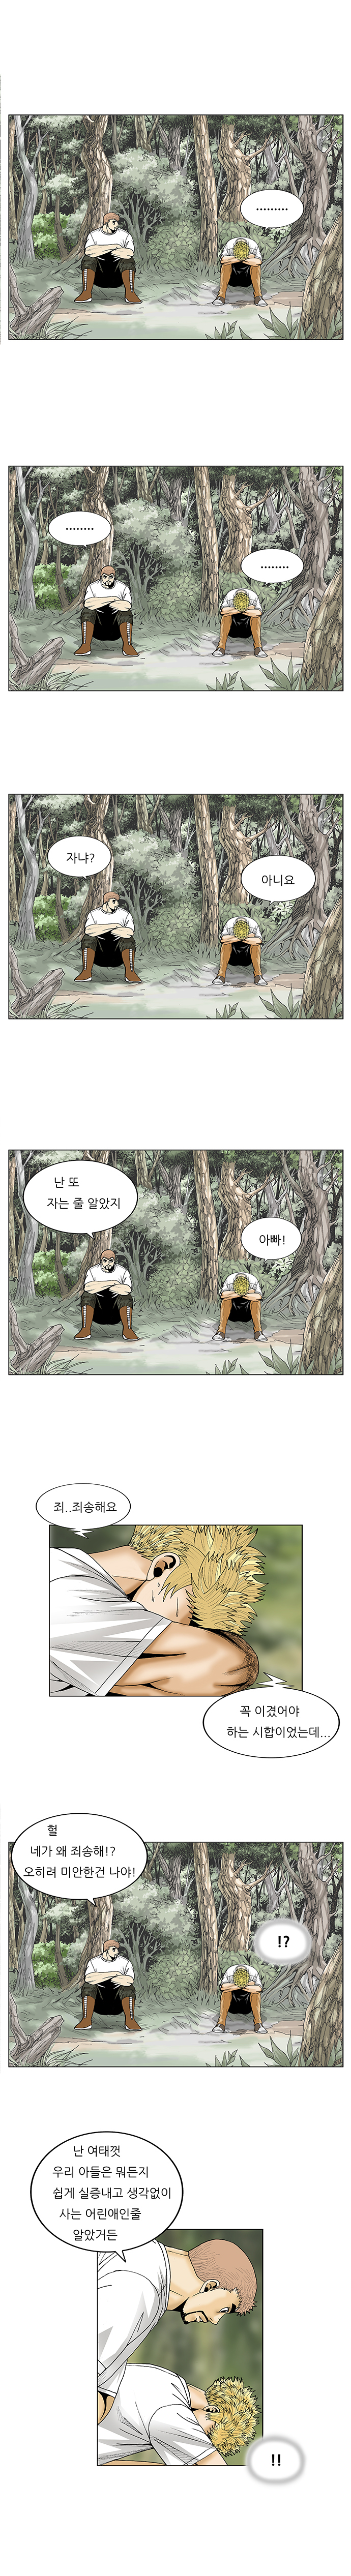 Ultimate Legend - Kang Hae Hyo - Chapter 74 - Page 13